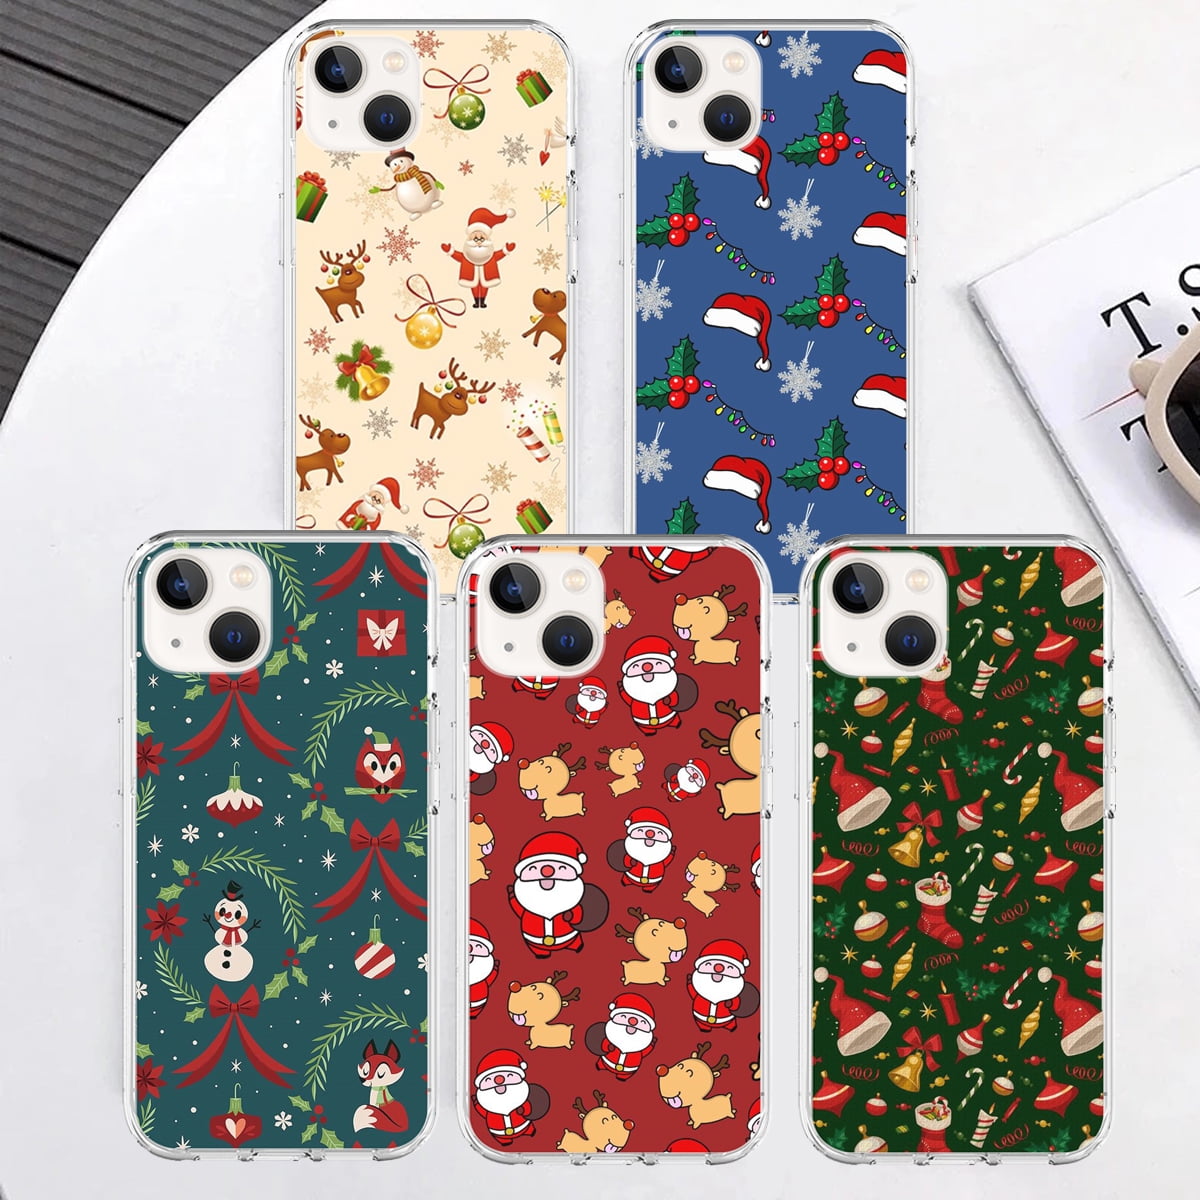 iphone 12/12 pro 11 pro/max Aesthetic dog plus letter notepad cute phone case  XR XS/max  iphone 11 iphone 12 mini 12 pro max